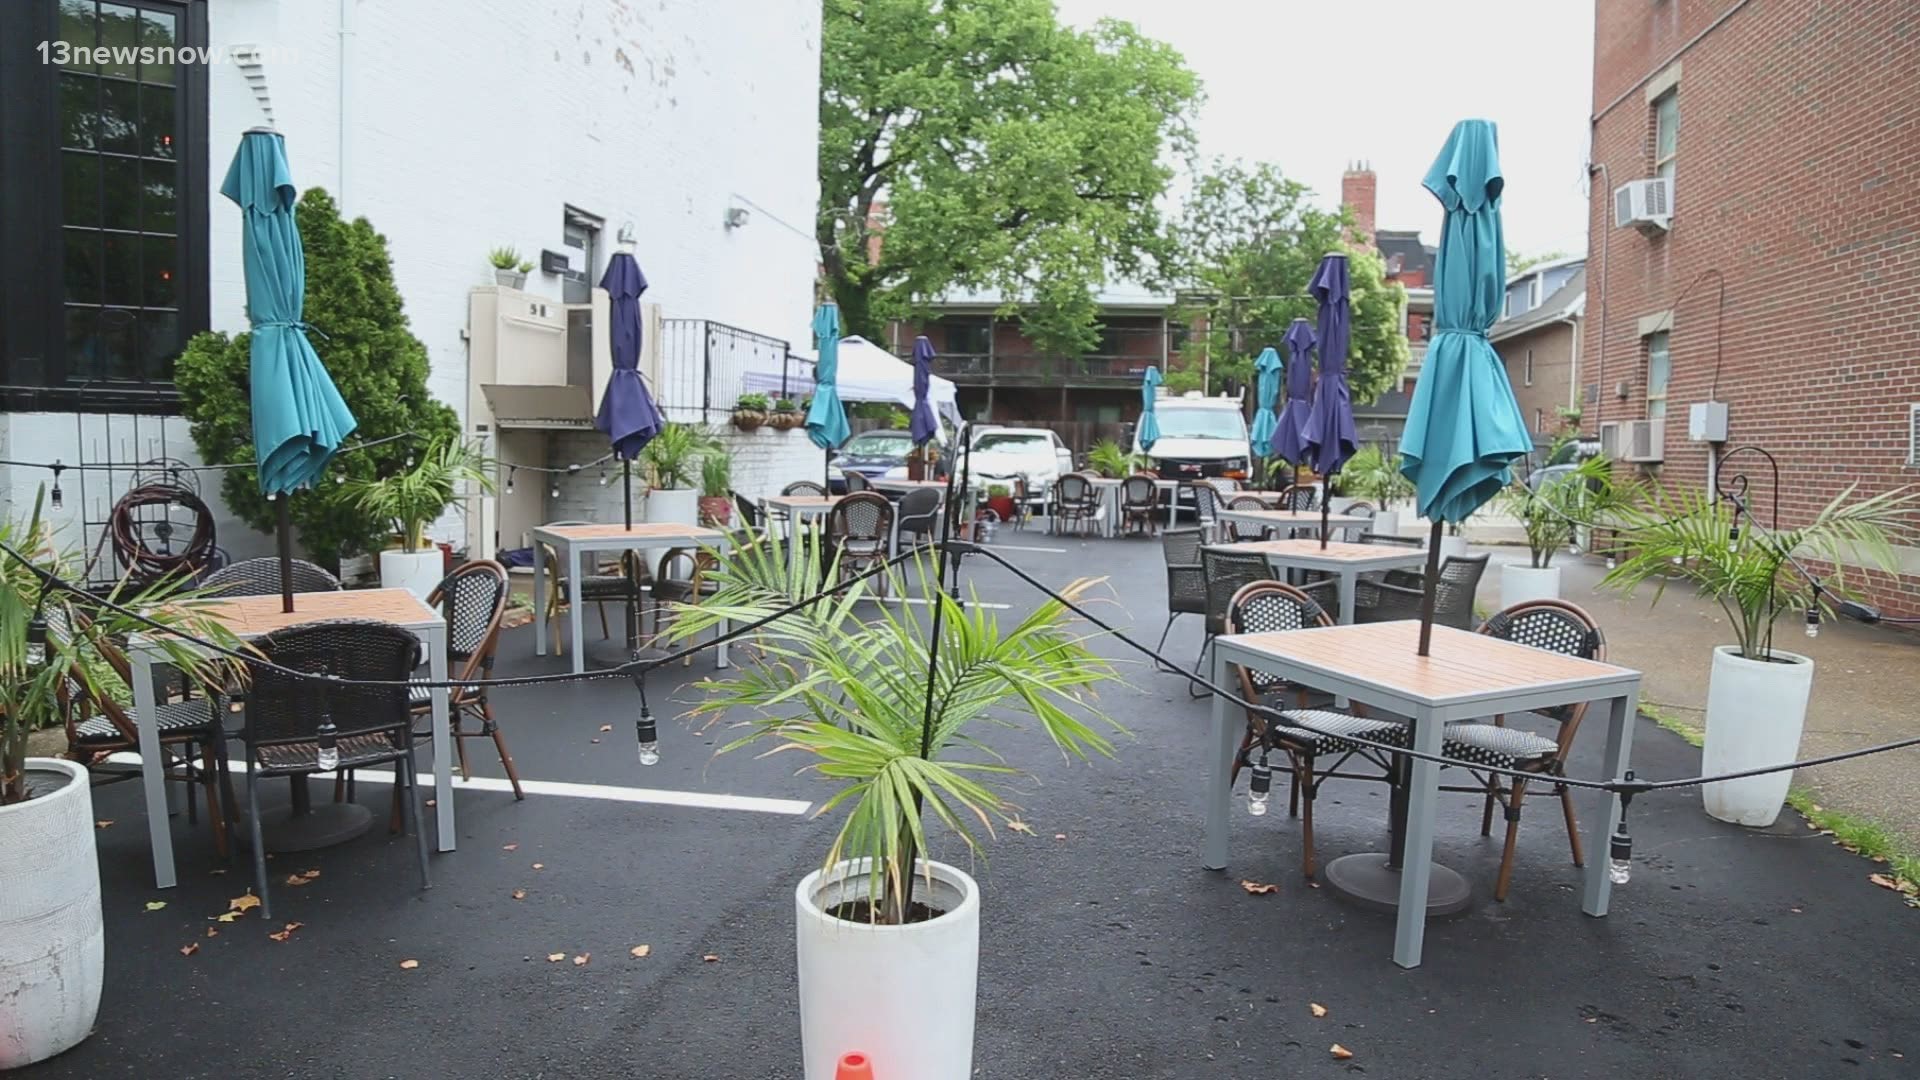 Norfolk City leaders have launched a pilot program called 'Streateries.' It'll allow businesses to keep outdoor dining spaces through Dec. 2022.